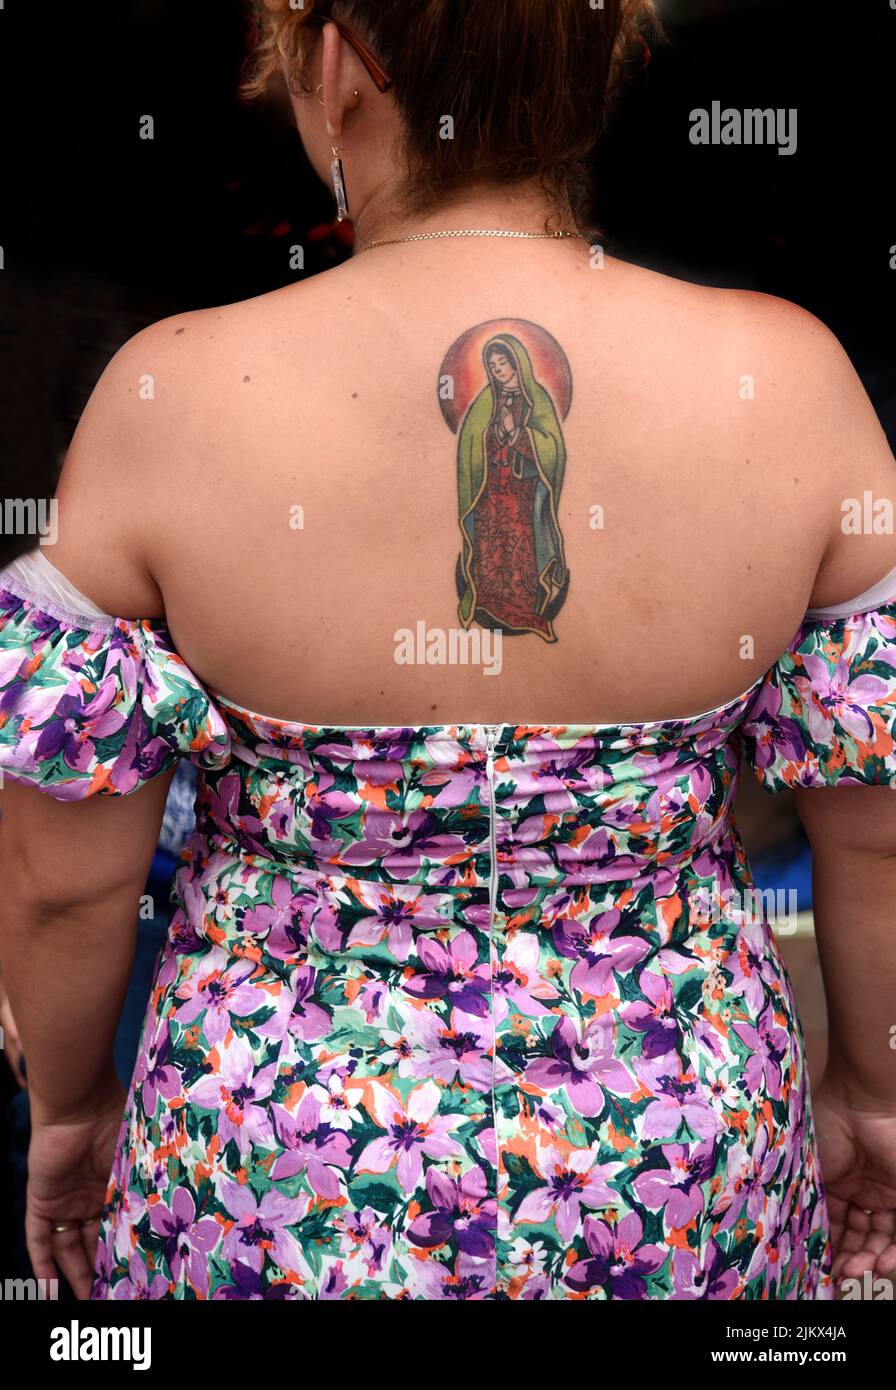 A woman with a tattoo of Our Lady of Guadalupe on her back in Santa Fe, New Mexico. Stock Photo